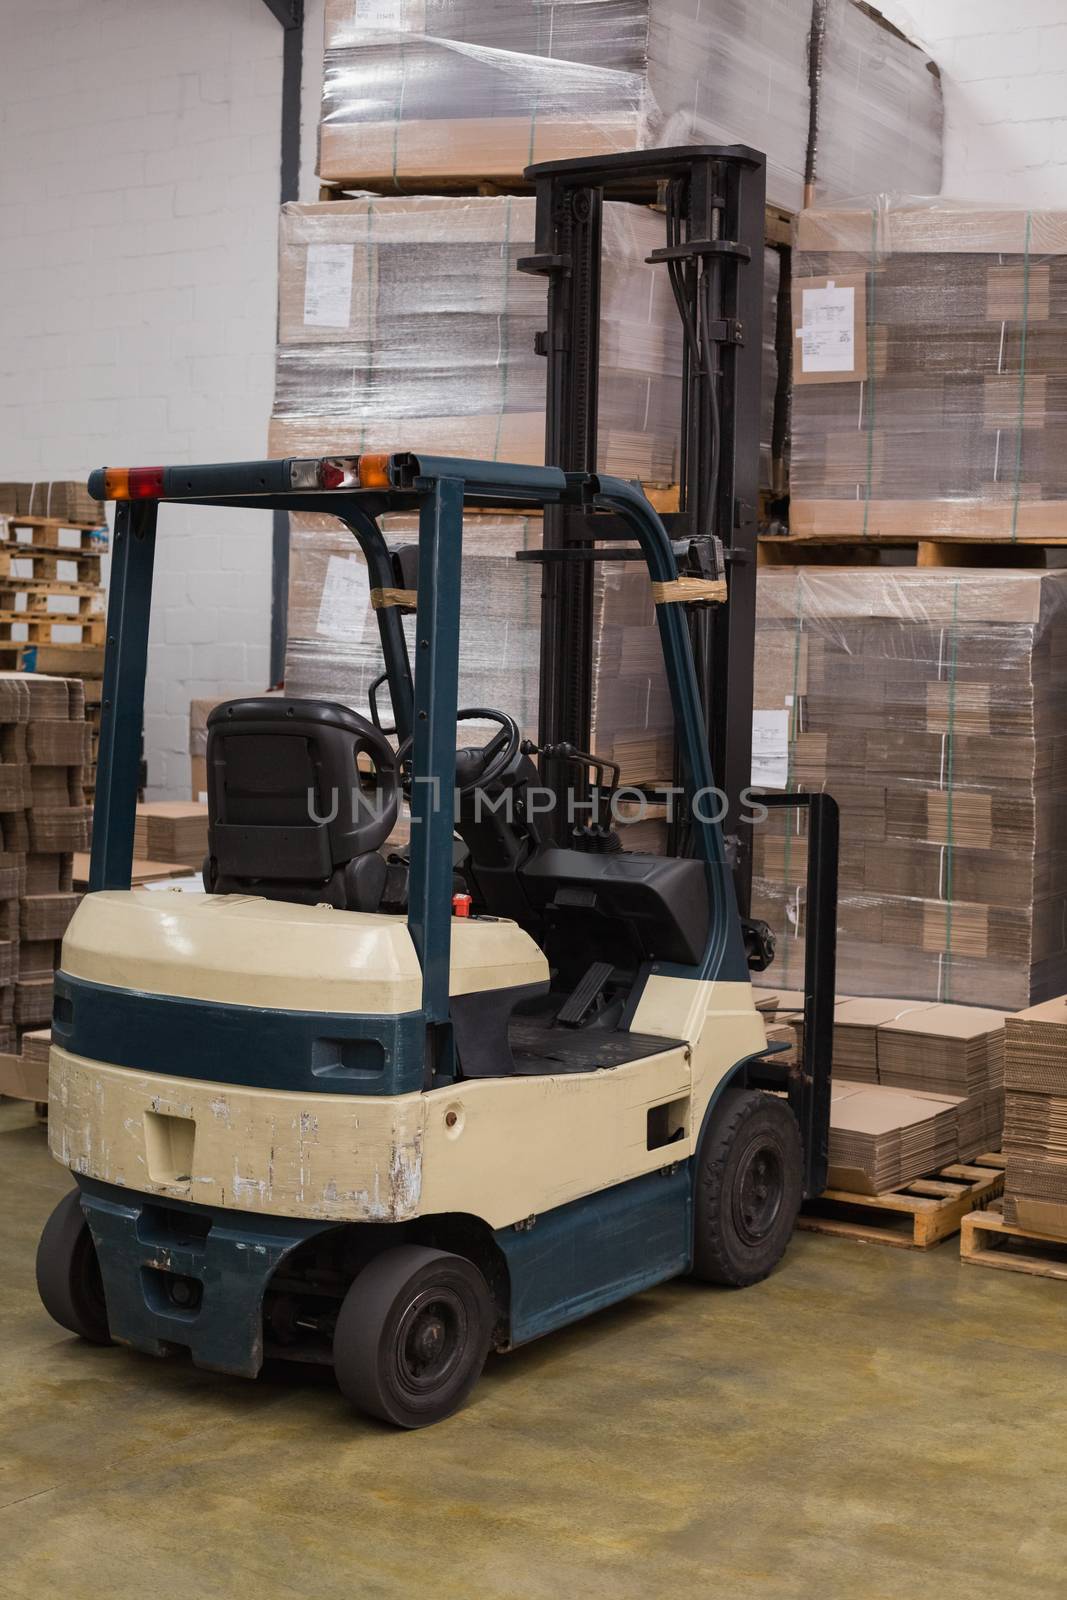 Forklift in a large warehouse by Wavebreakmedia